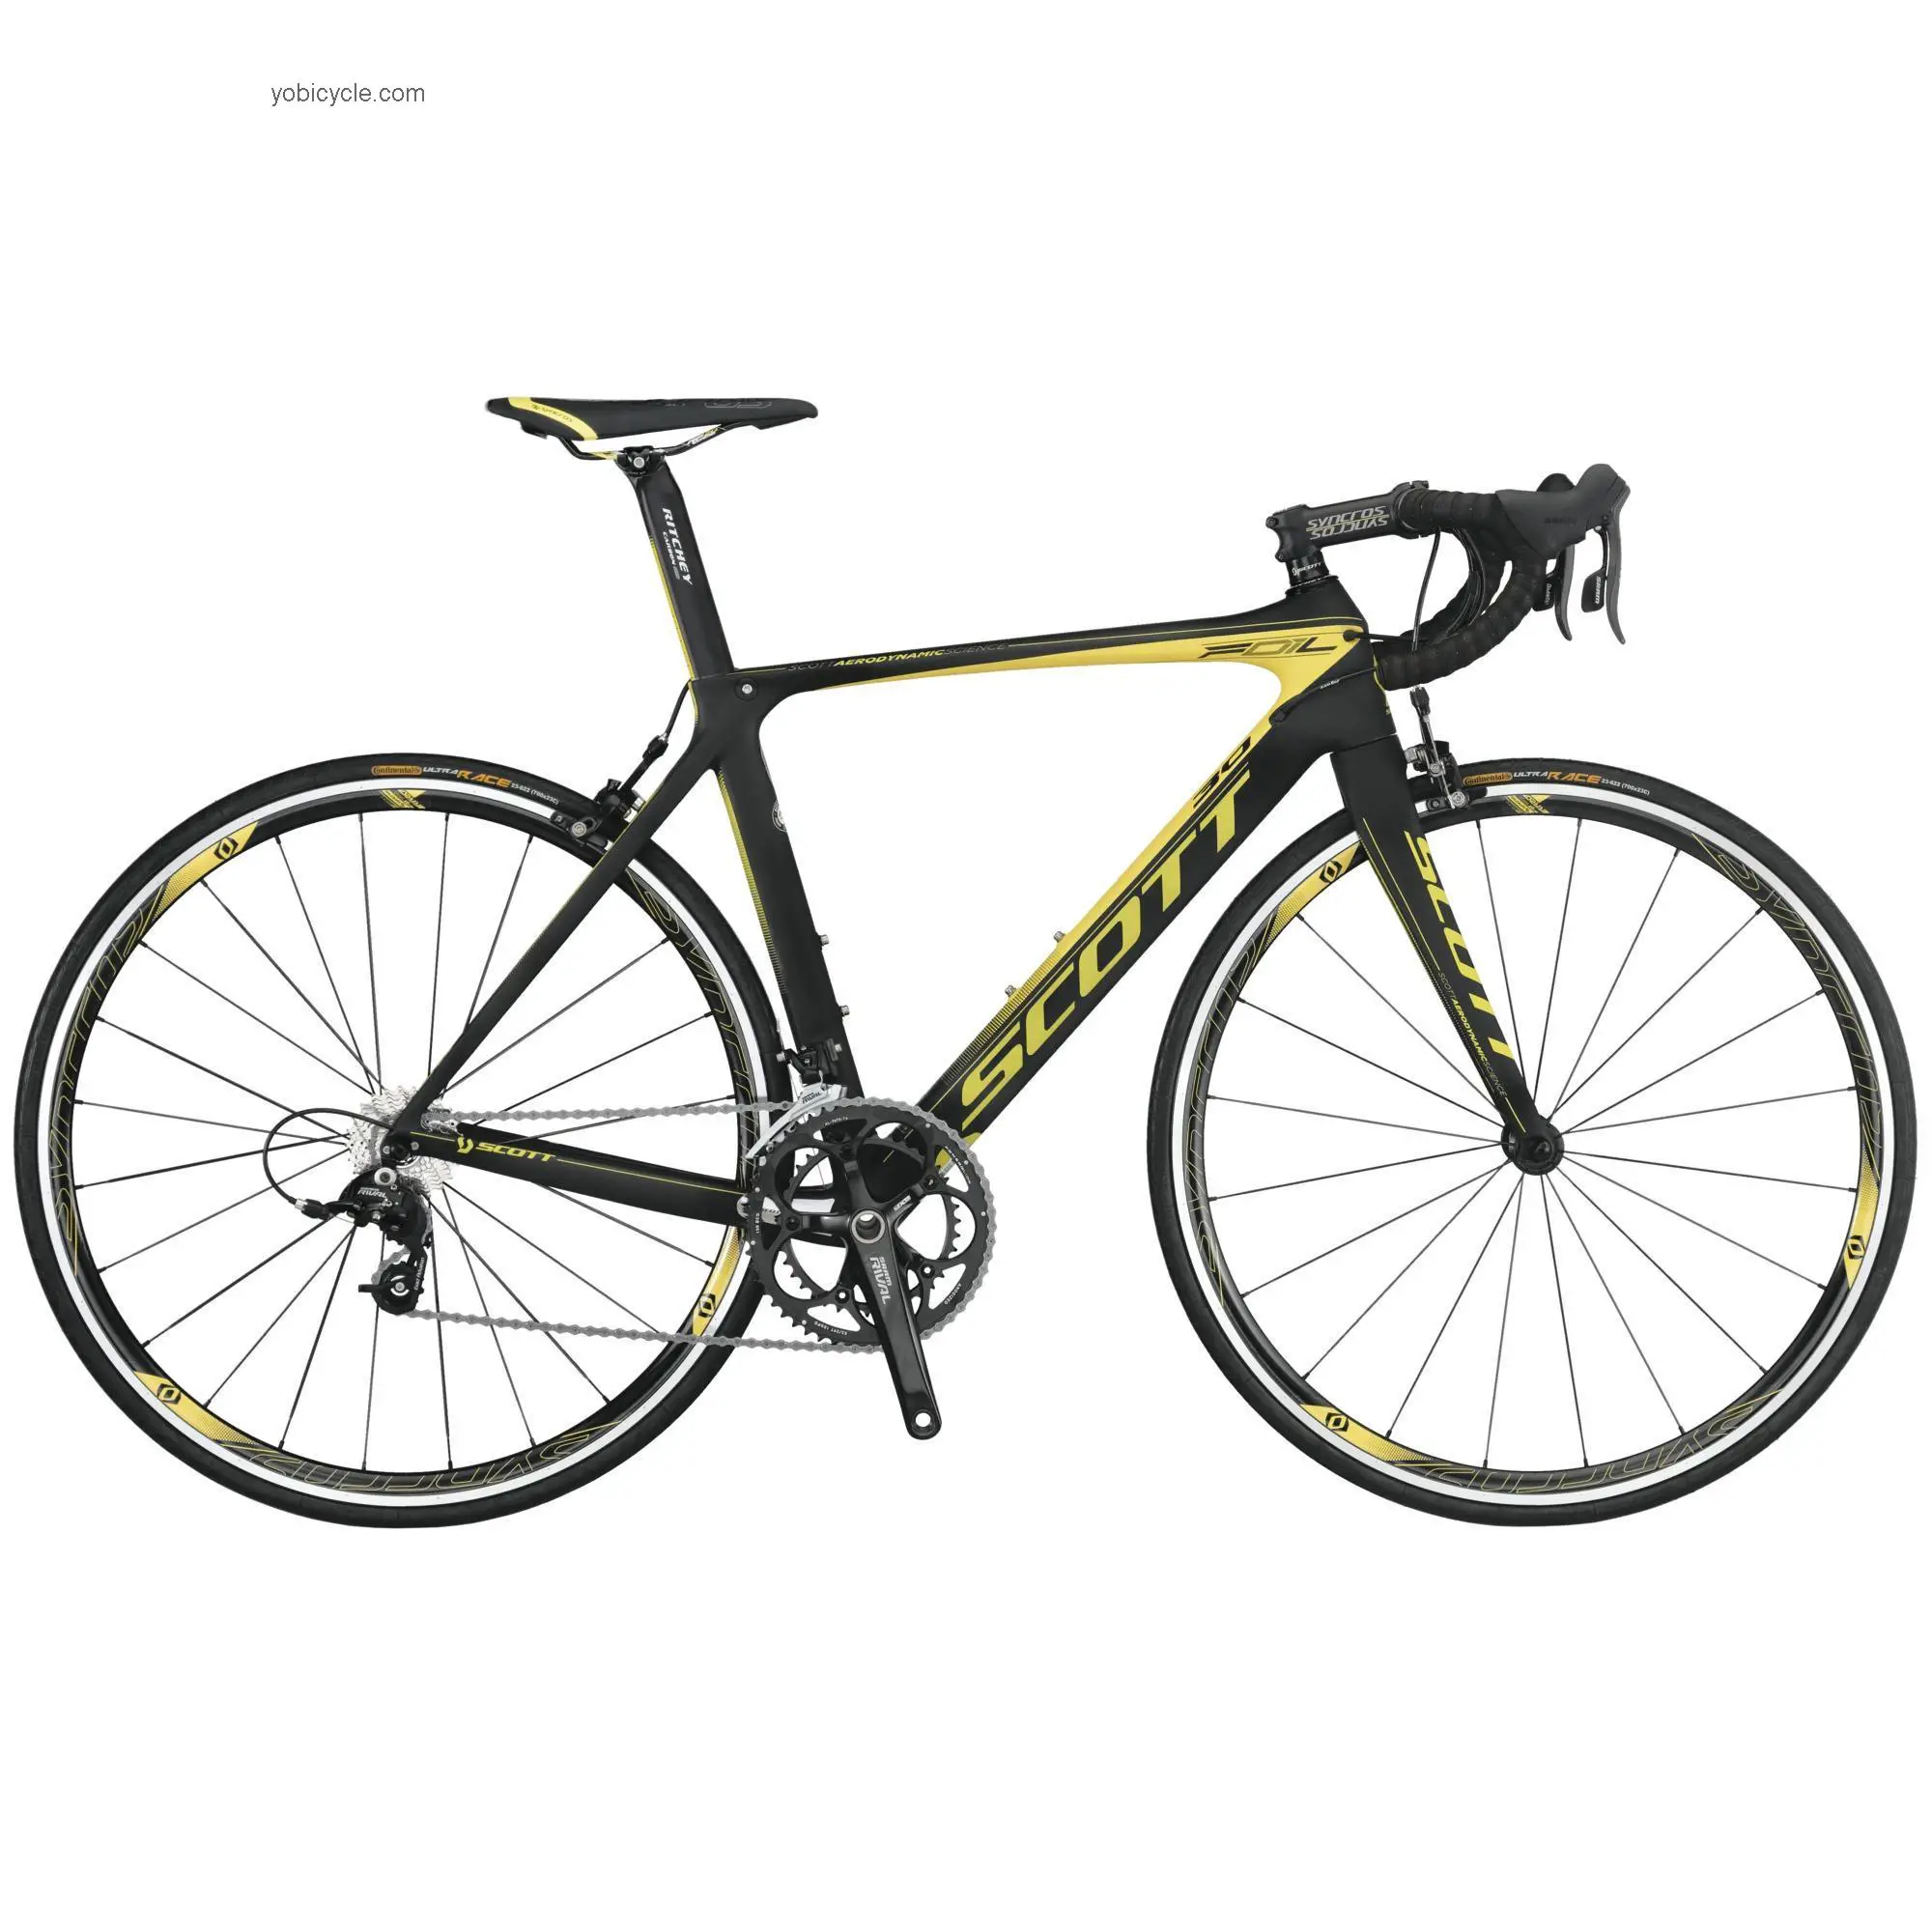 Scott  Foil 30 Technical data and specifications